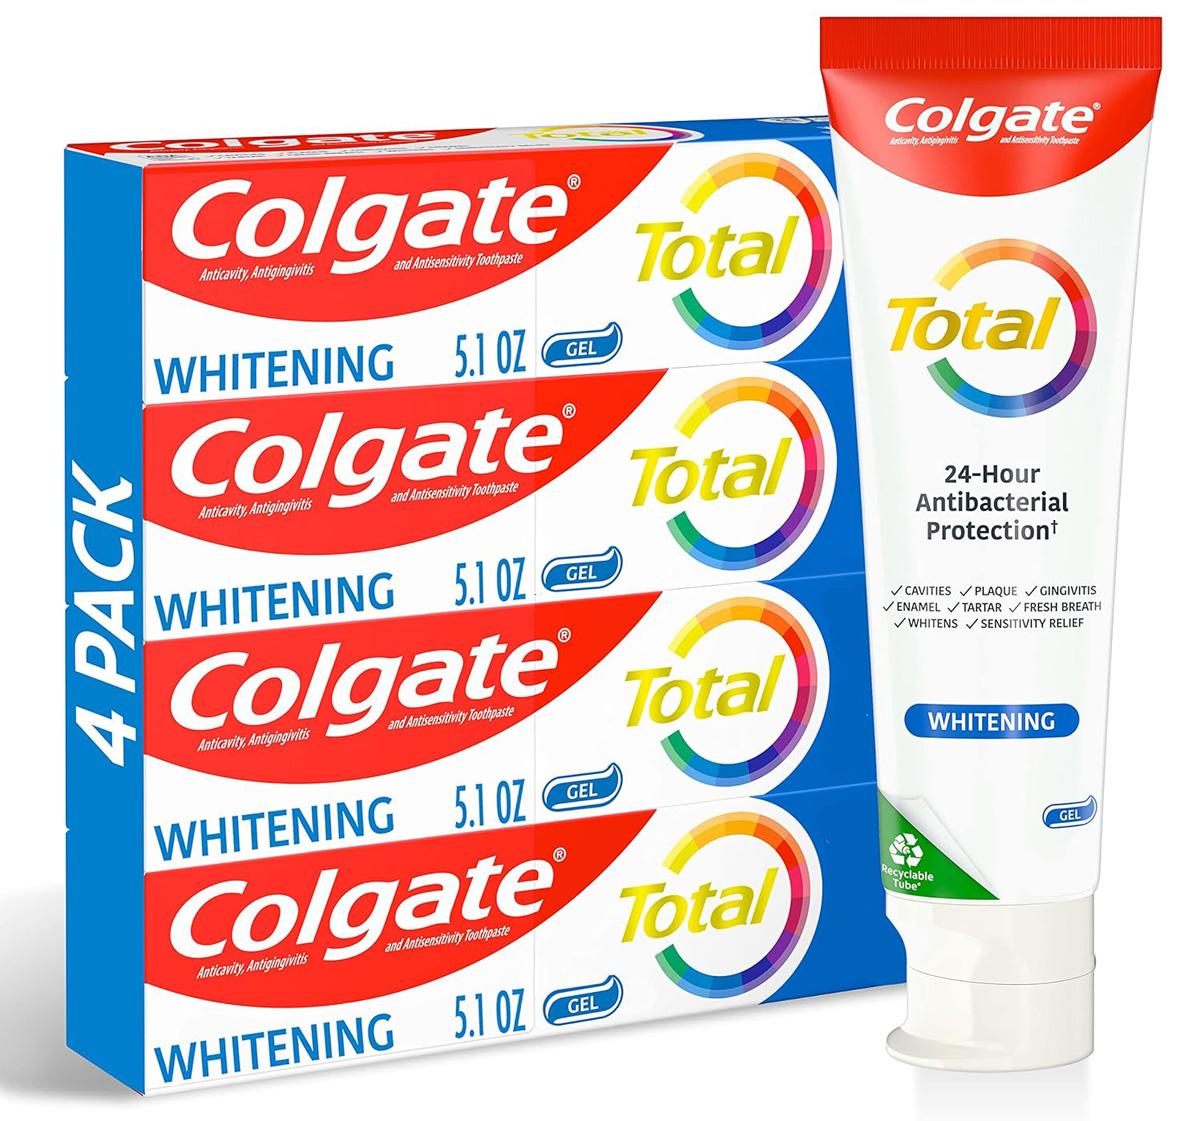 Colgate Total Whitening Toothpaste Gel 4 Pack for $7.19